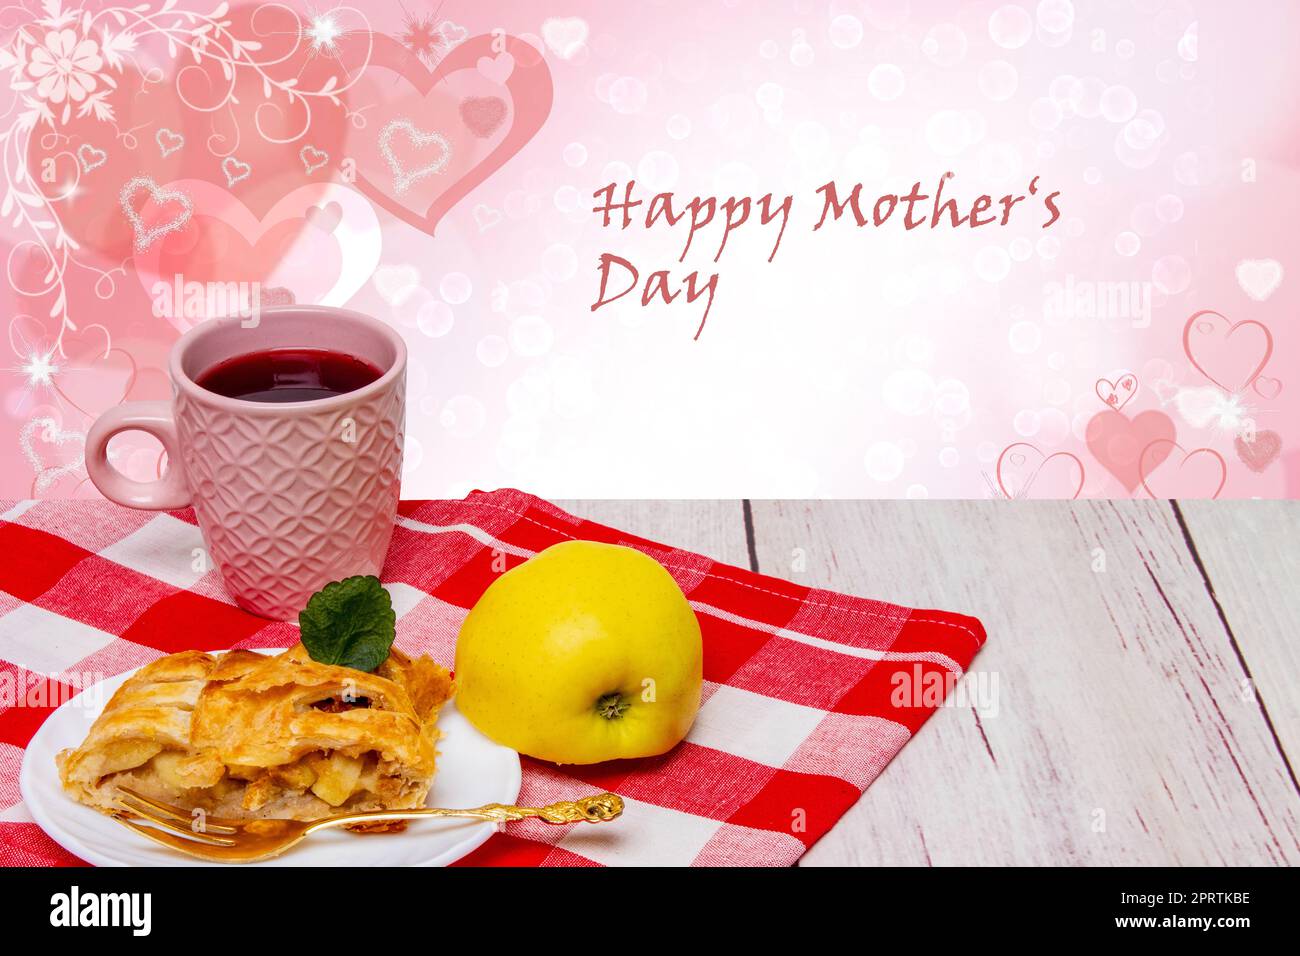 A slice of homemade baked fresh apple strudel with a cup of coffee and a fresh apple on red picnic cloth over abstract hearts bokeh background. Happy Mothers Day text. Stock Photo